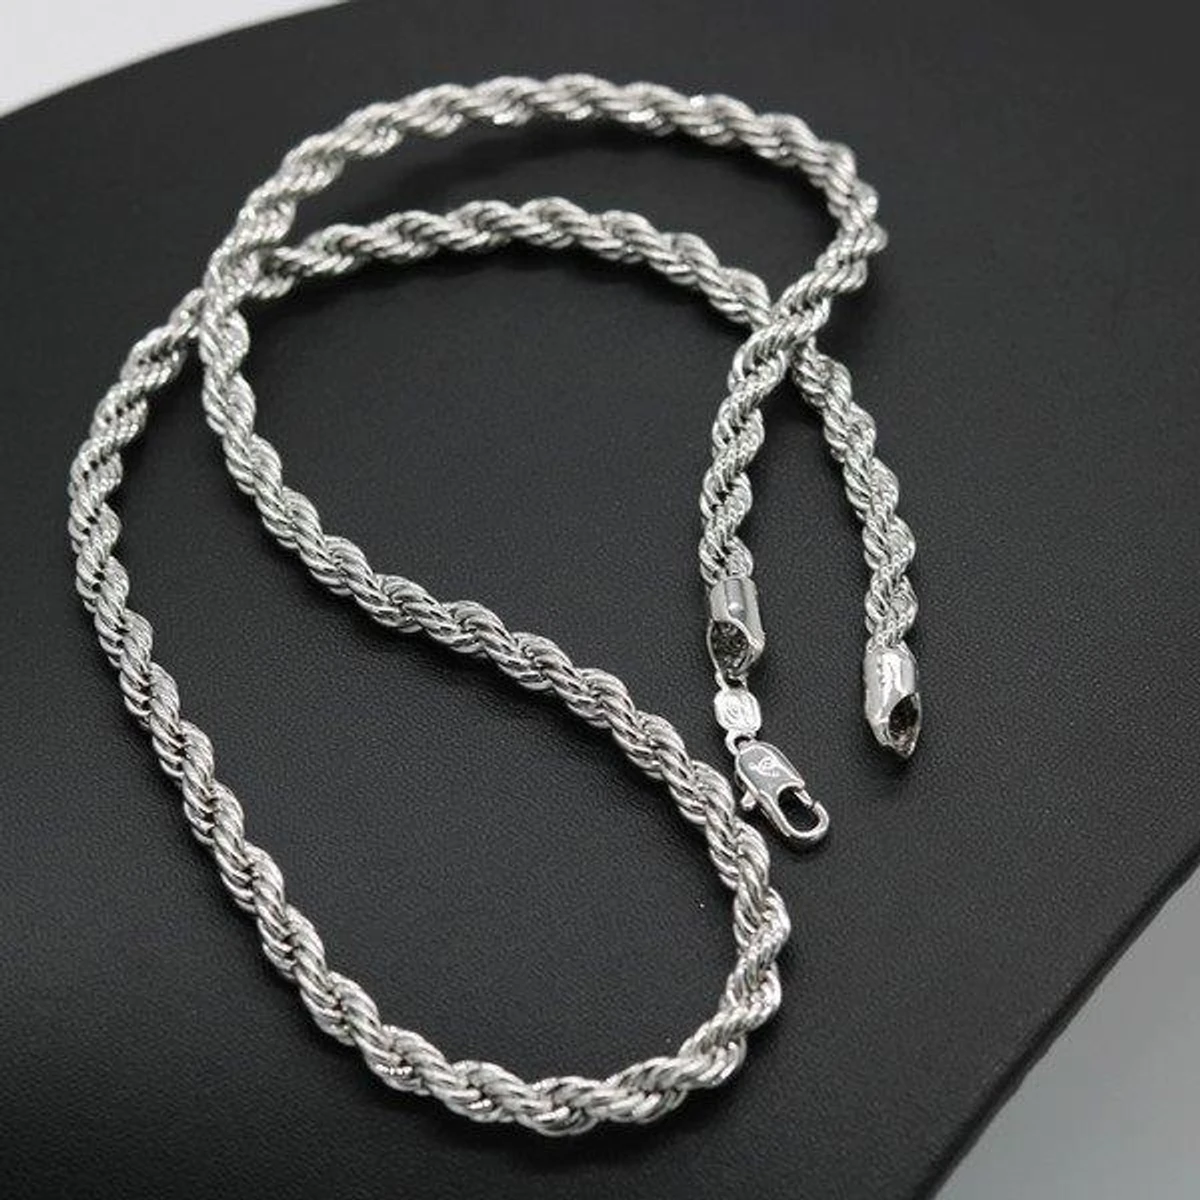 Rounded Rofe Chain Stainless Steel Necklace For Men